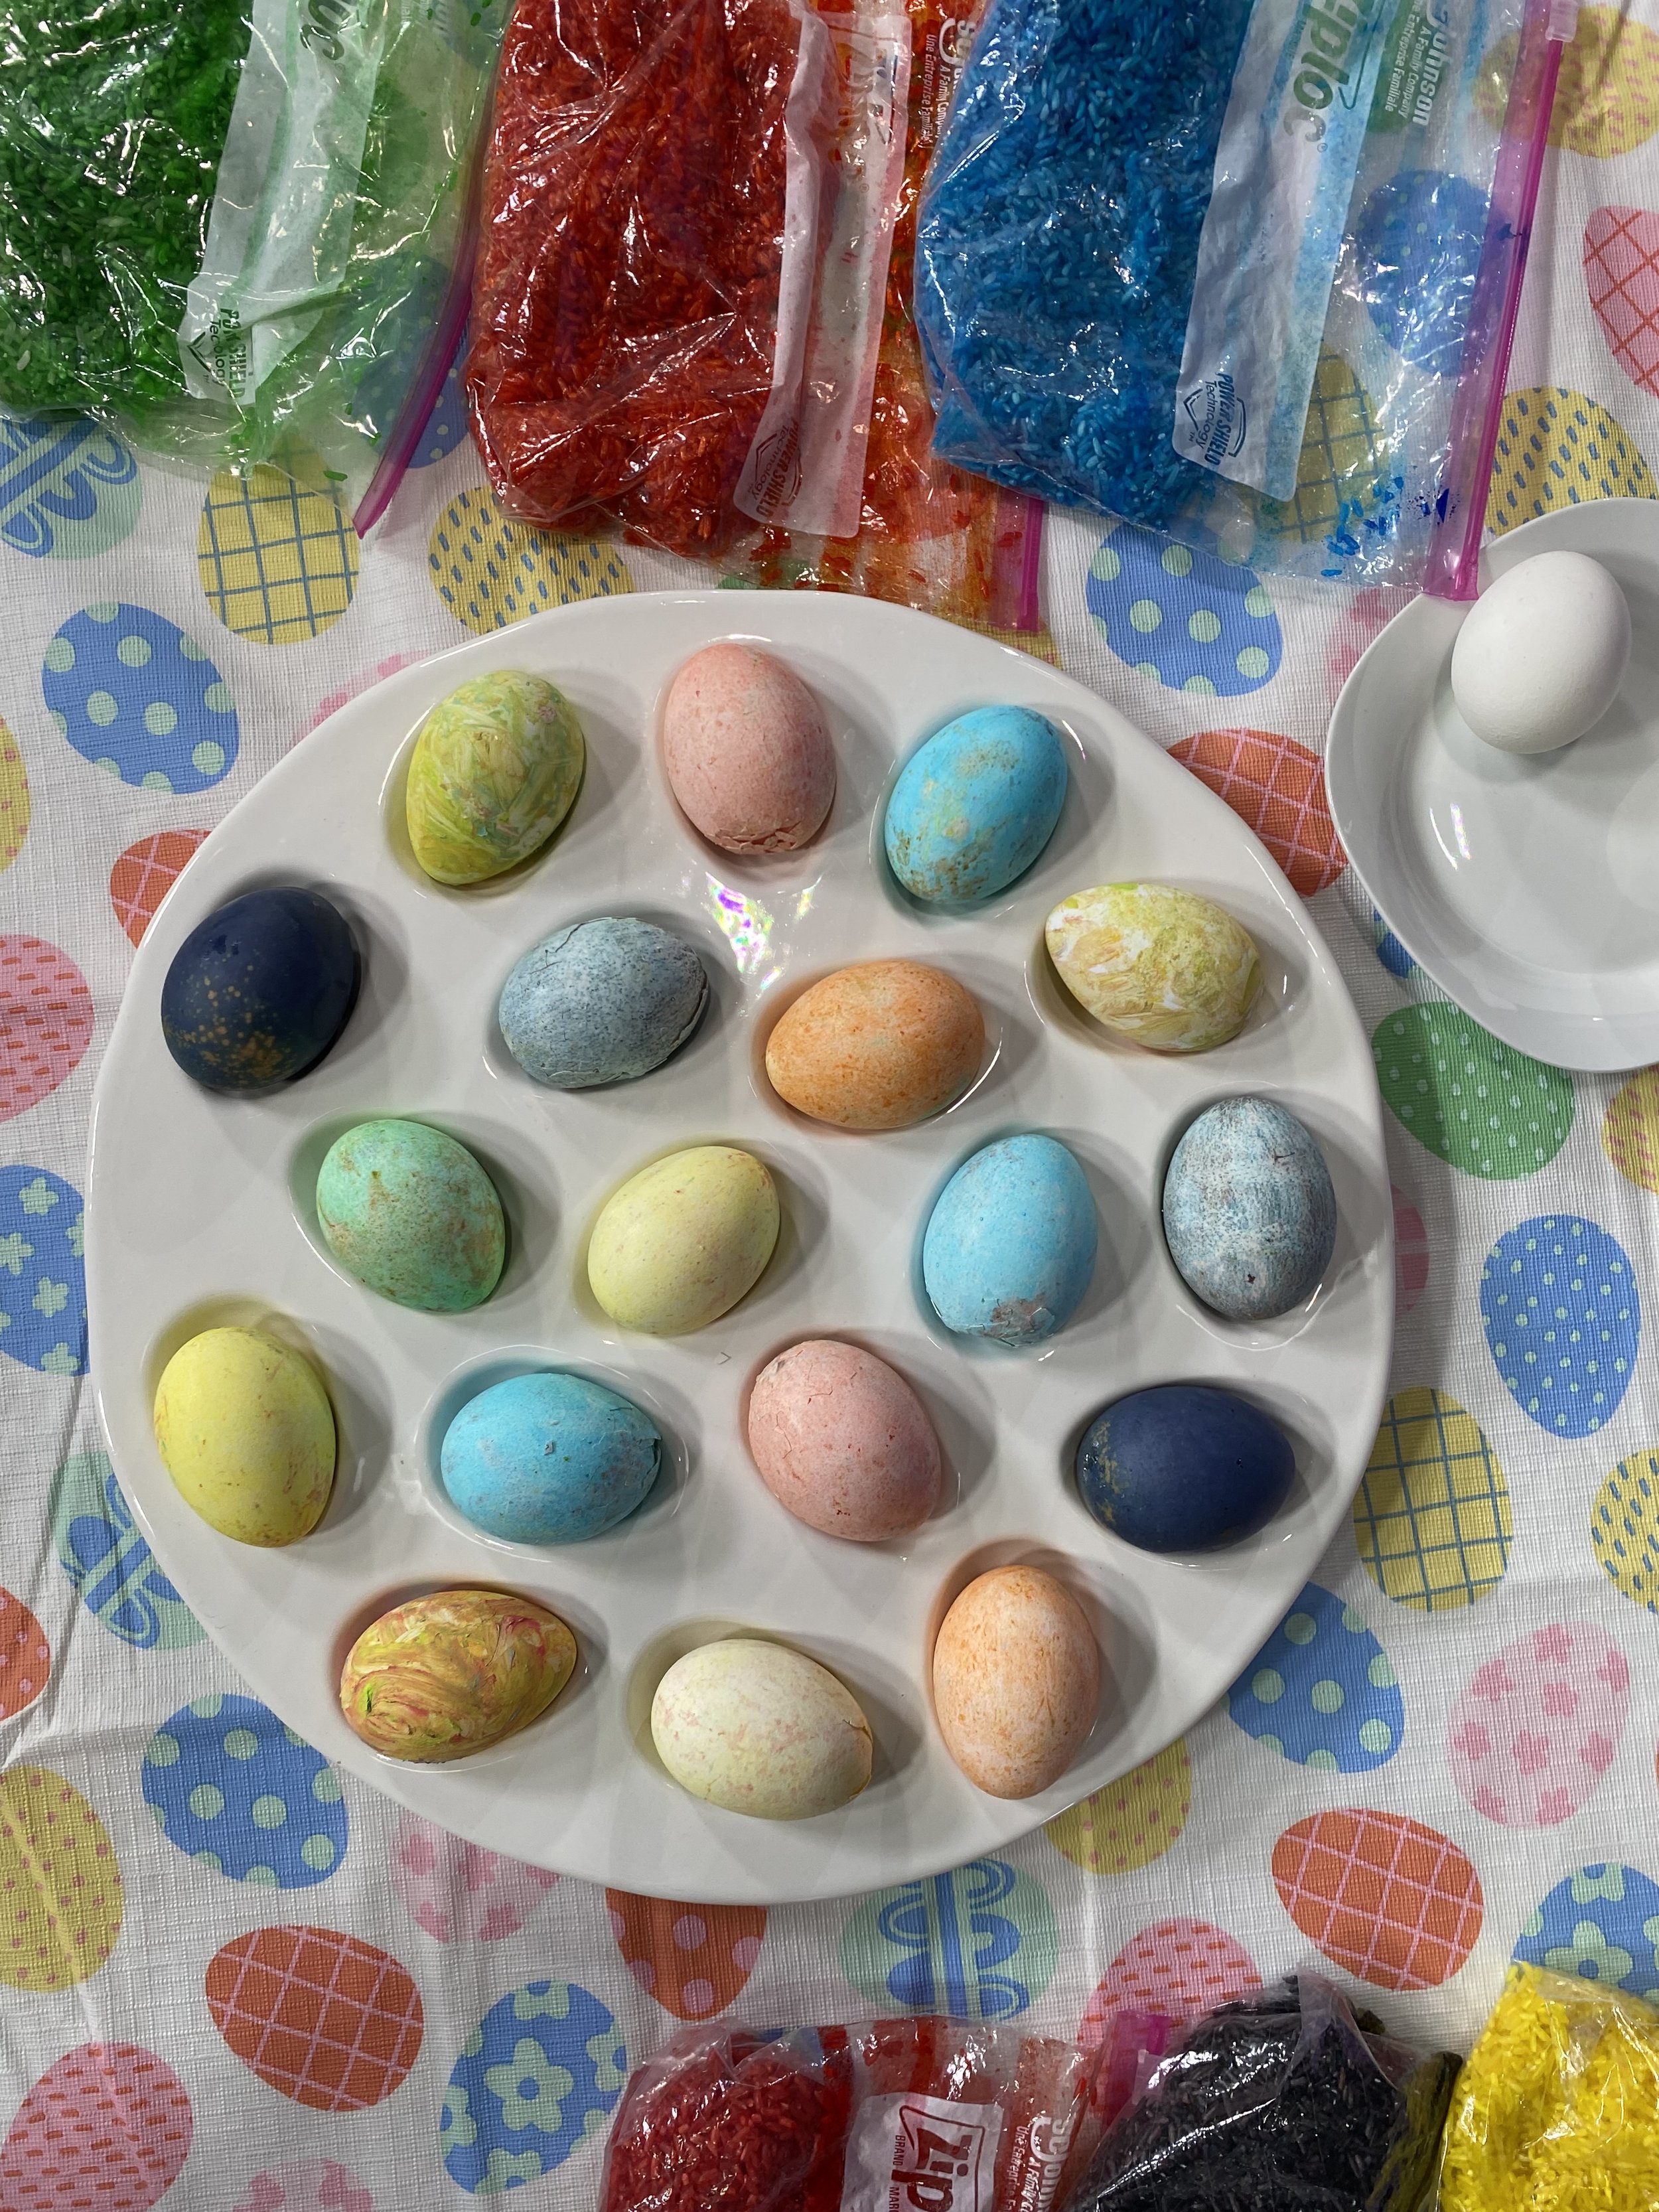 A Fun New Way To Dye Easter Eggs